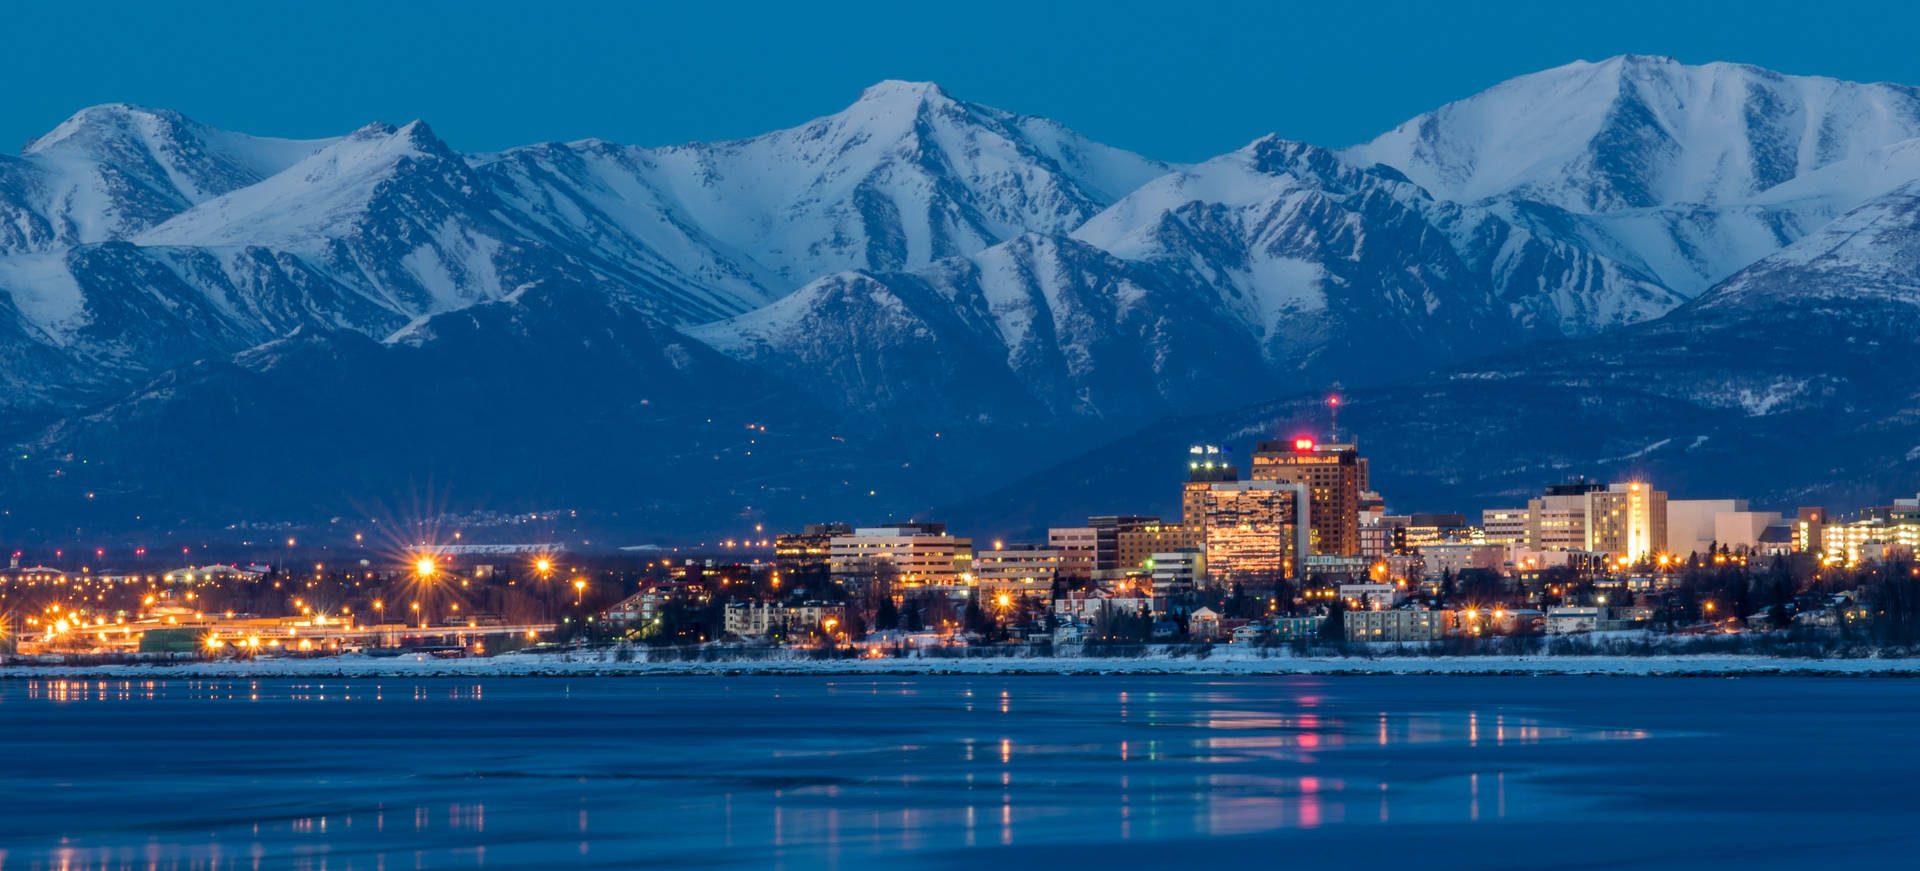 Mountains In Anchorage Wallpaper